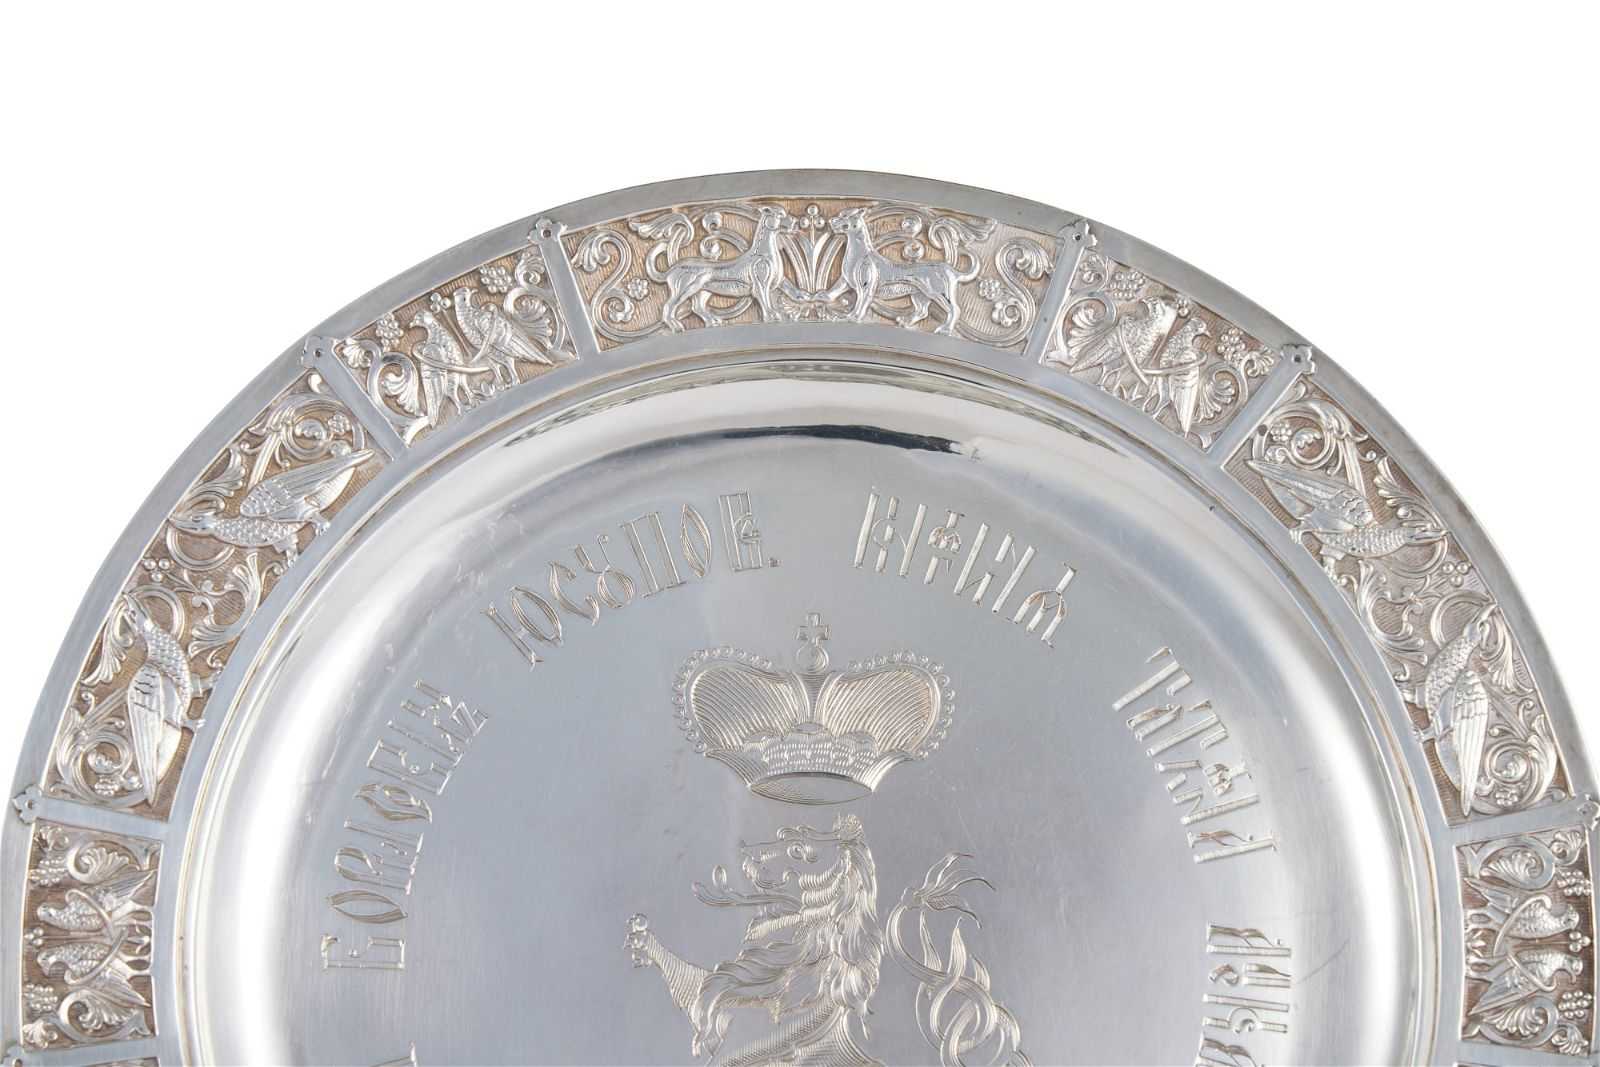 Detail from a set of 18 French Second Empire silver dinner plates by Alex Gueyton from the Youssoupov Scandinavian service, estimated at $50,000-$80,000 at Sotheby’s.